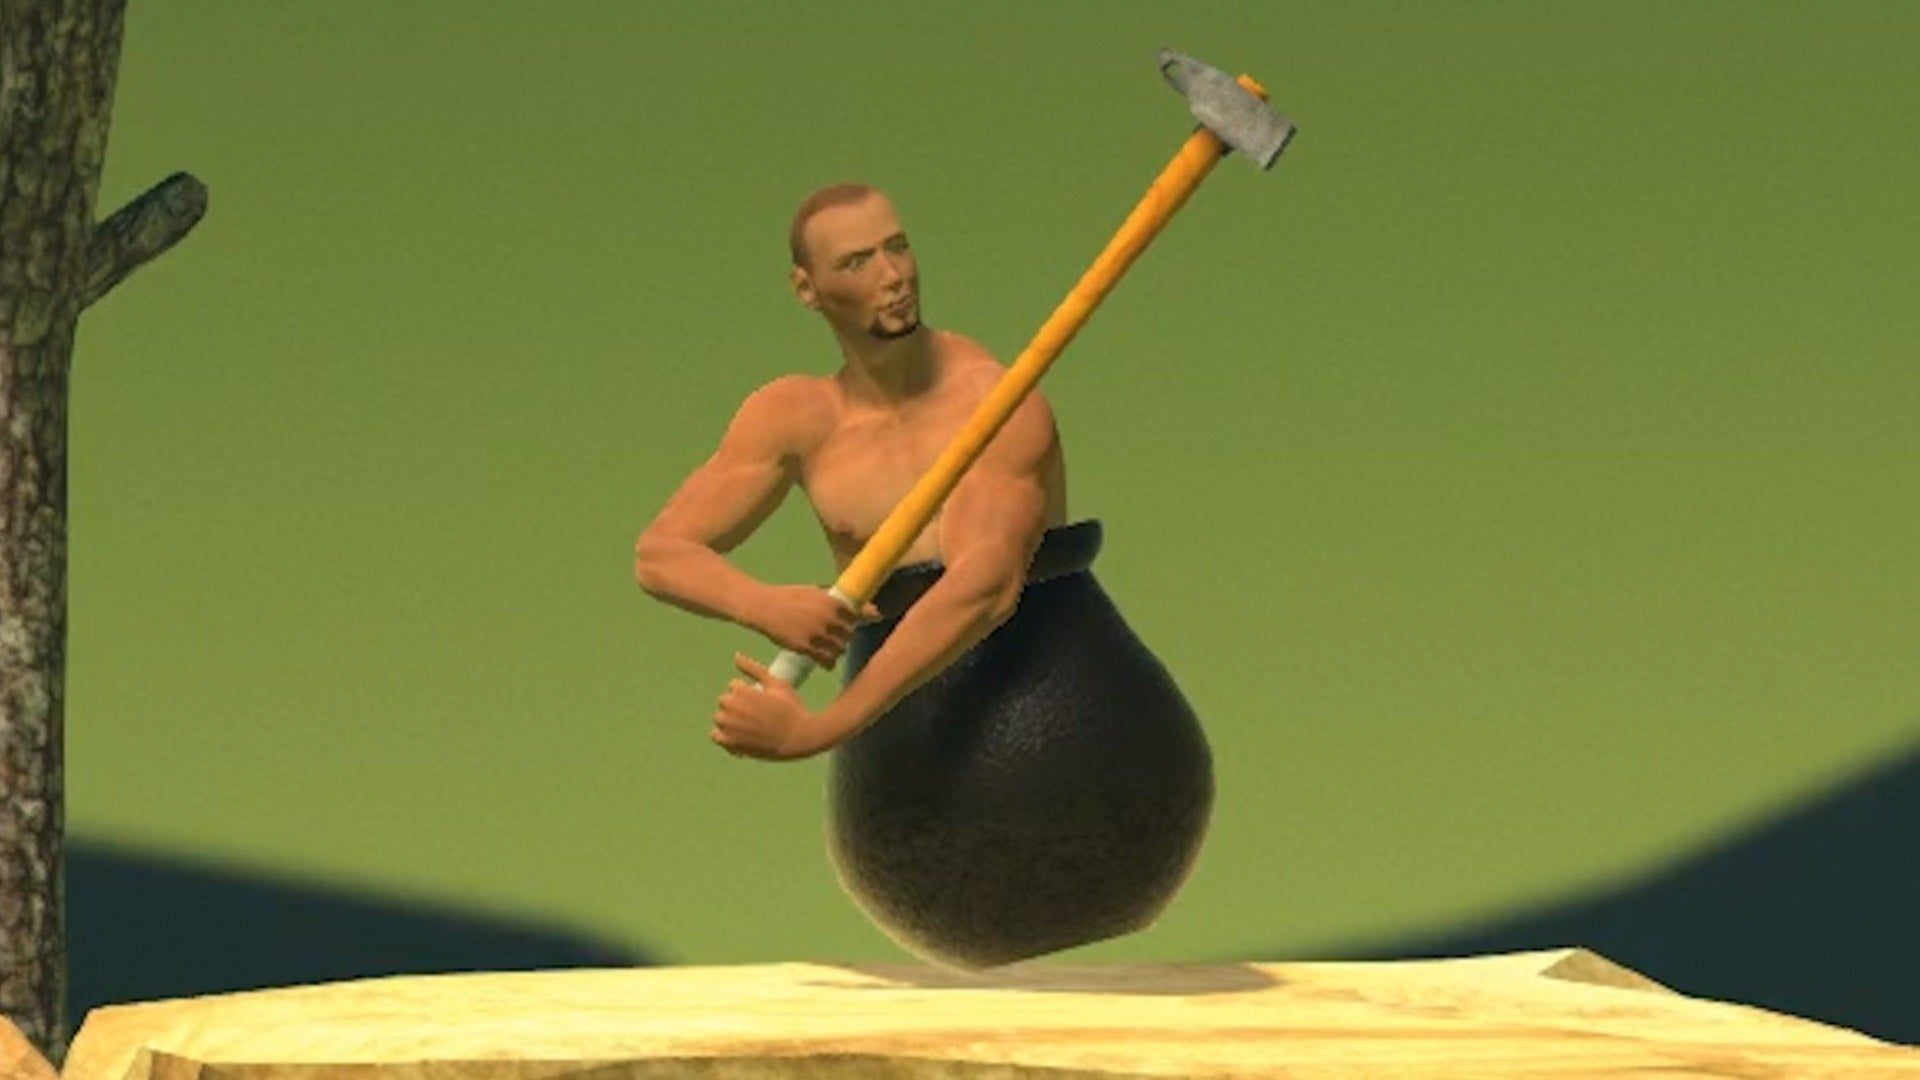 Getting Over It Finished In Under 2 Minutes (Speedrun)